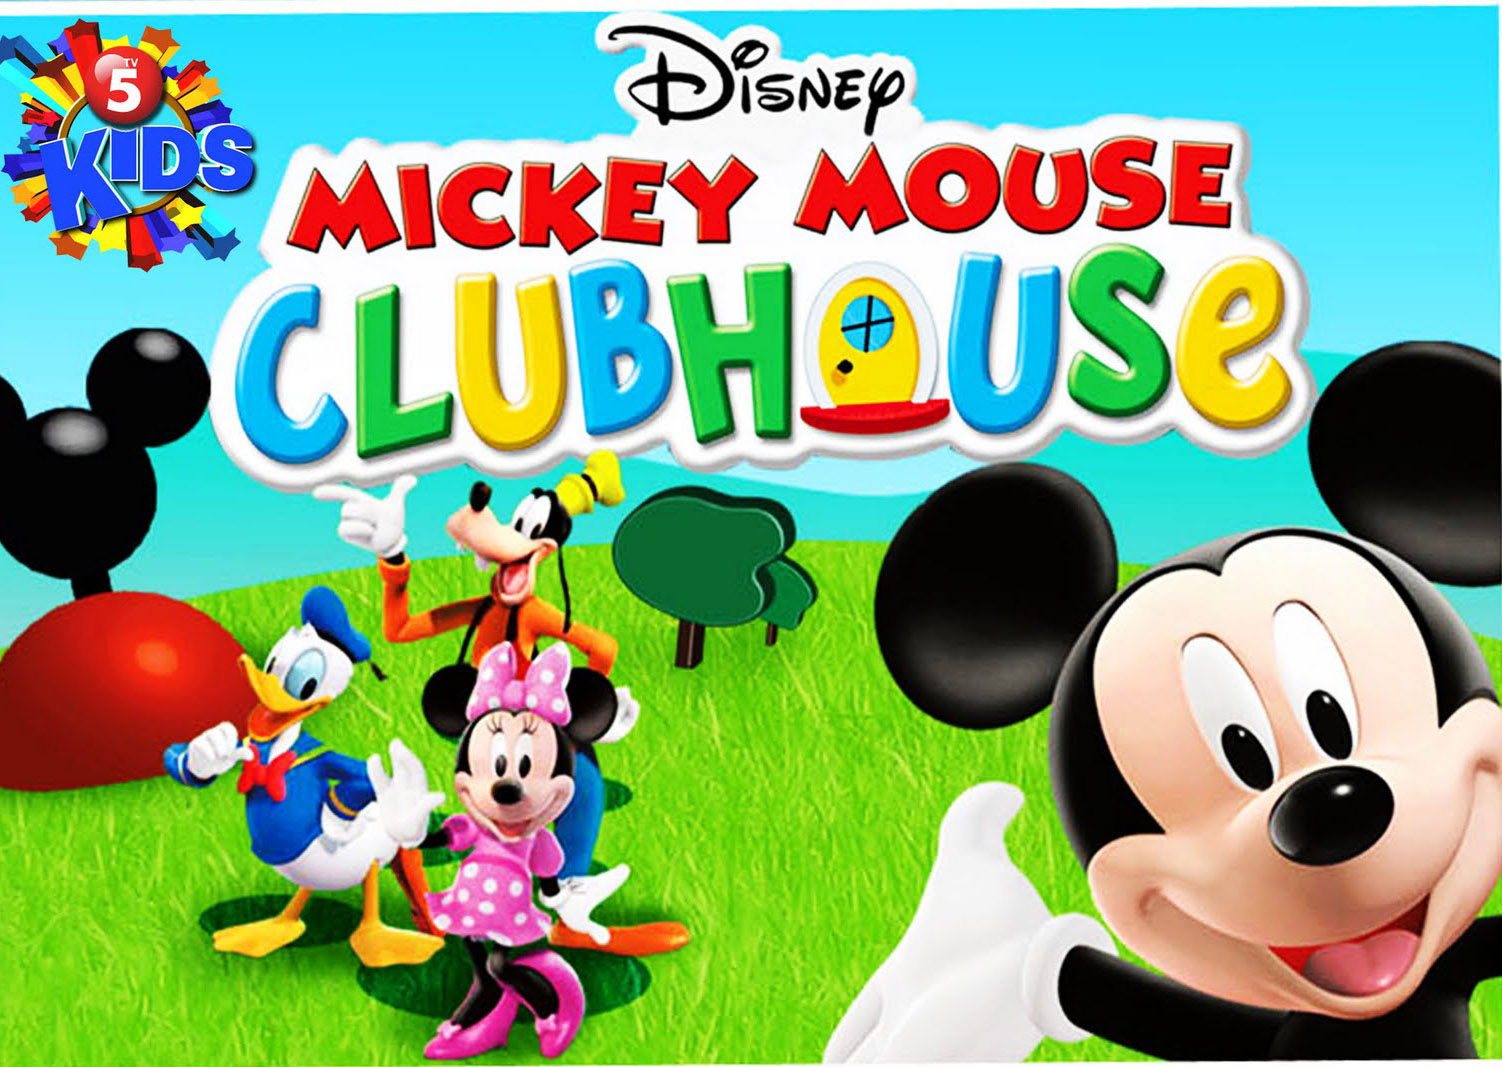 Mickey Mouse Clubhouse Image Wallpaper